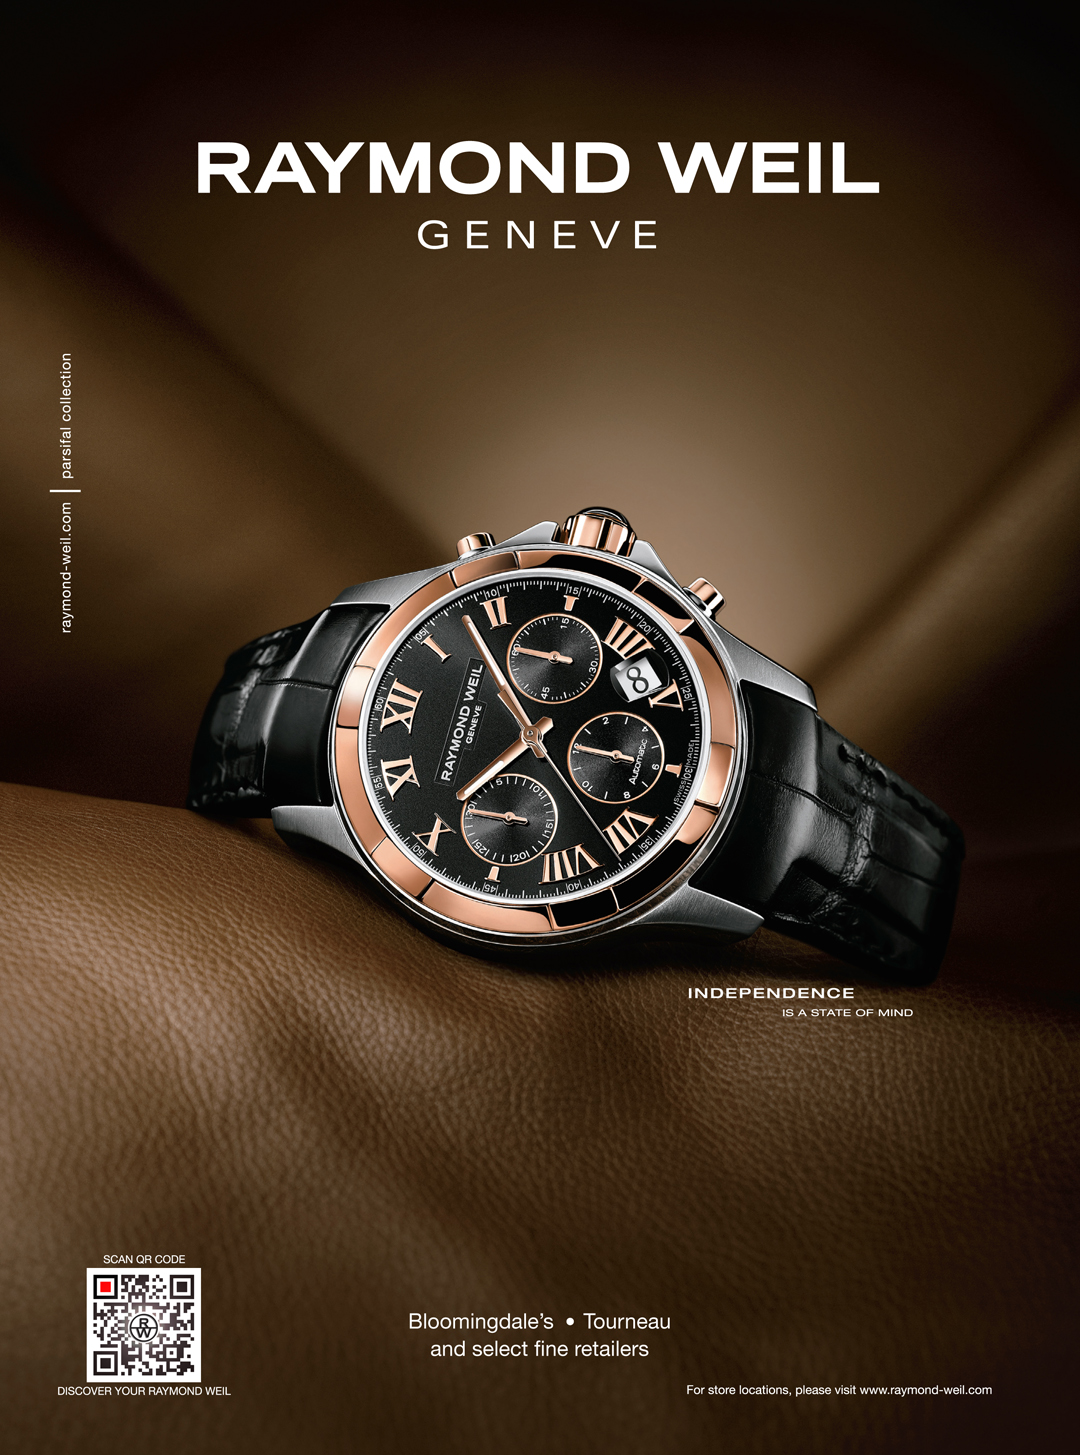 Raymond Weil Exploits New Trend in Print Advertising